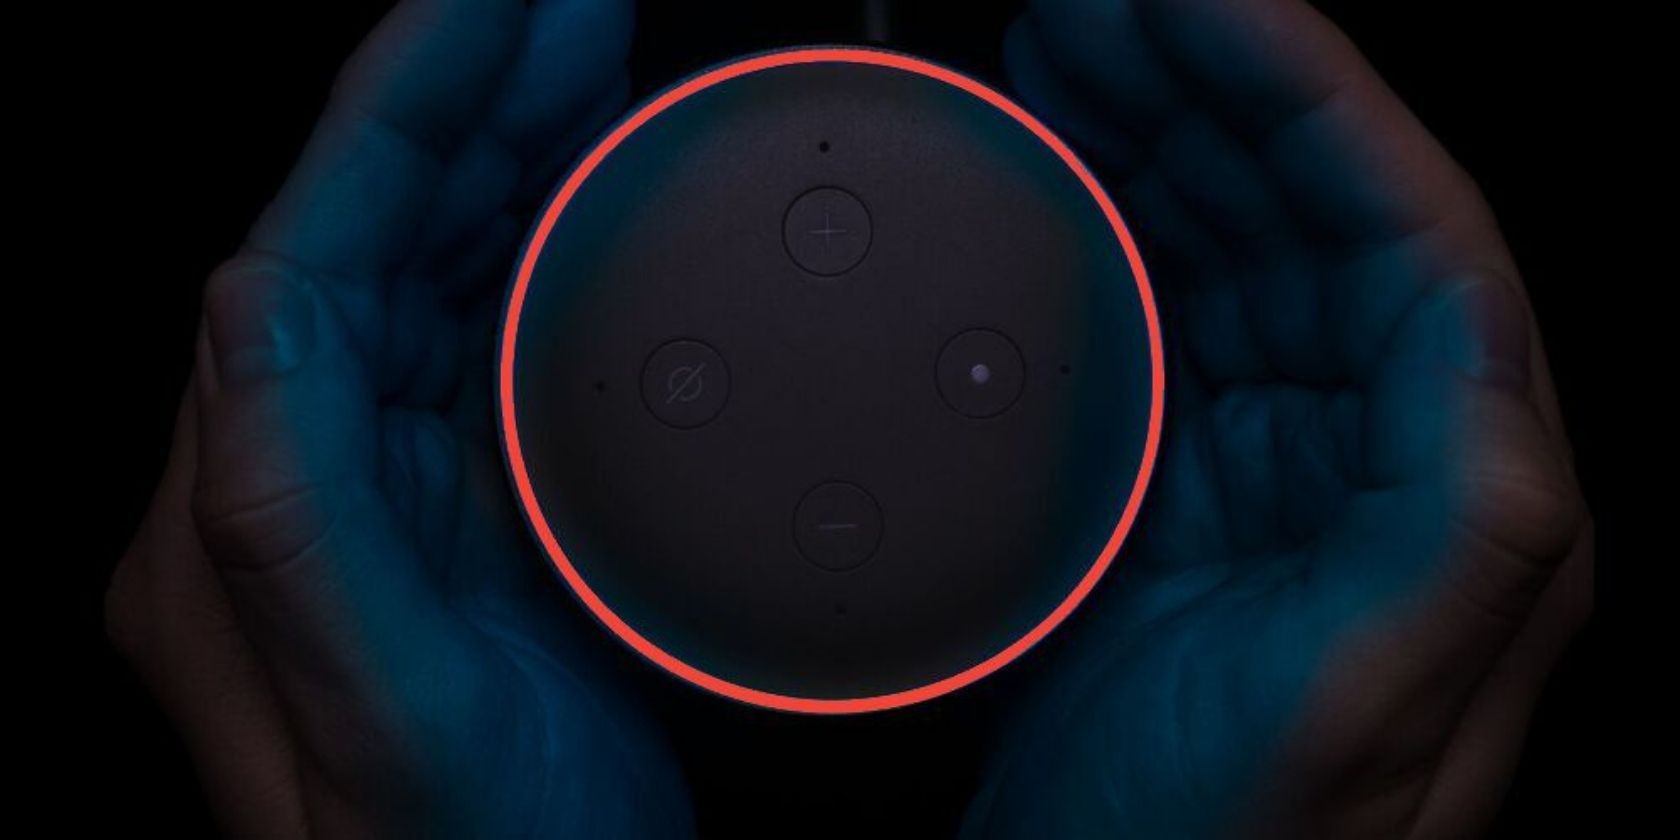 Hands holding Amazon Echo with red ring